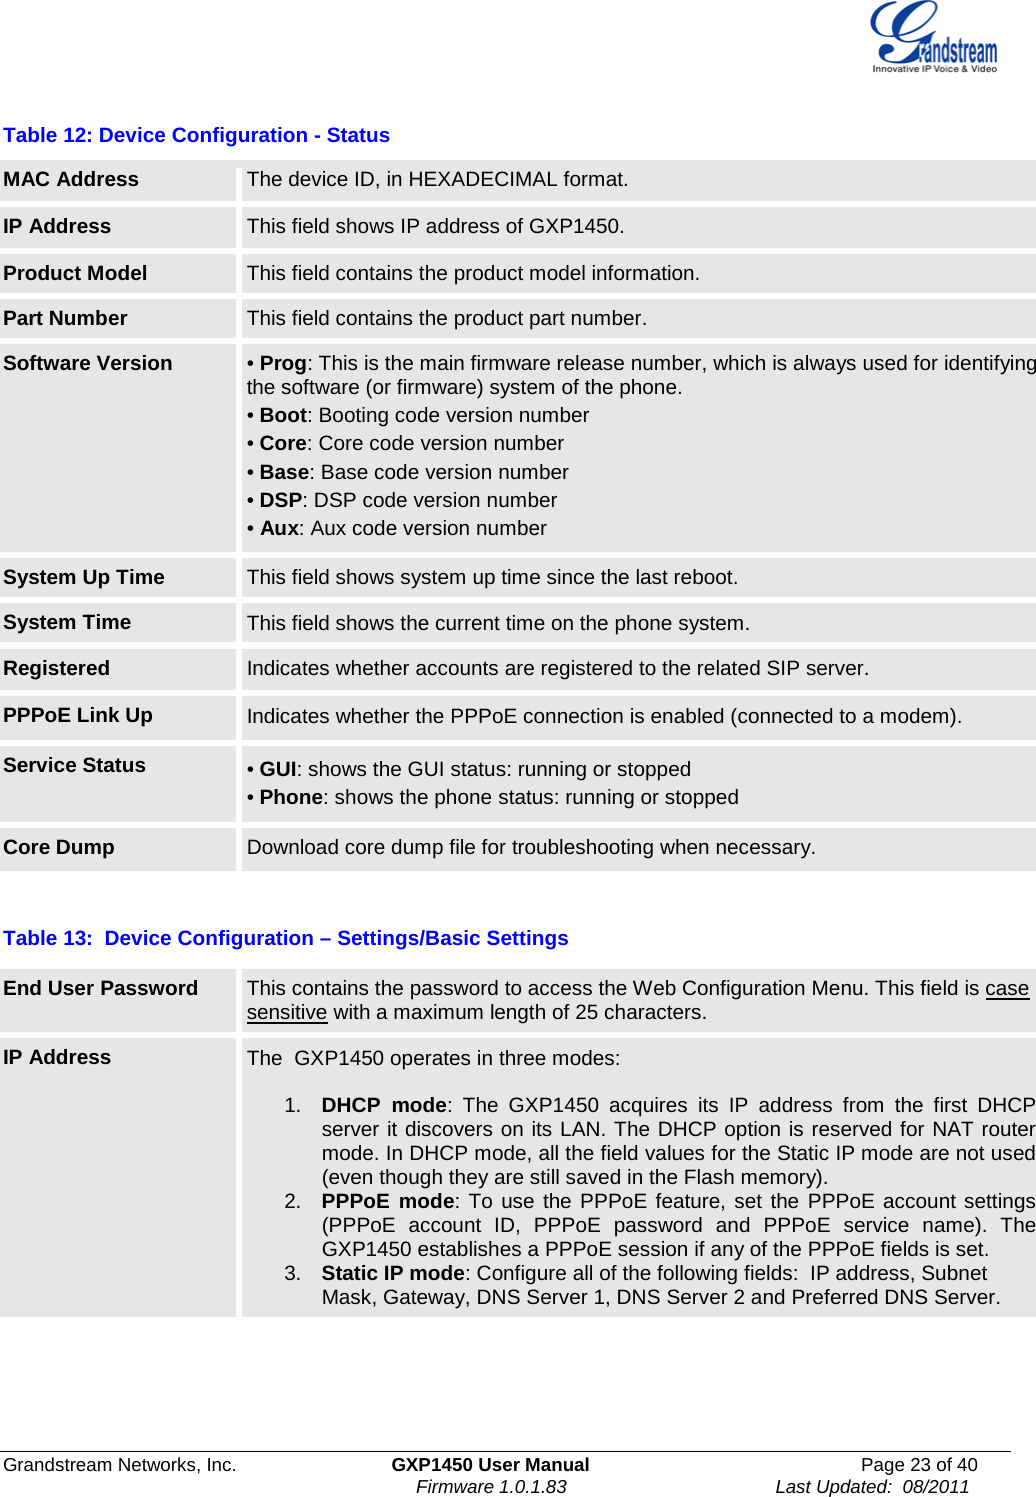  Grandstream Networks, Inc. GXP1450 User Manual Page 23 of 40                                                                          Firmware 1.0.1.83                                        Last Updated:  08/2011  Table 12: Device Configuration - Status  MAC Address  The device ID, in HEXADECIMAL format. IP Address This field shows IP address of GXP1450. Product Model This field contains the product model information. Part Number This field contains the product part number. Software Version • Prog: This is the main firmware release number, which is always used for identifying the software (or firmware) system of the phone. • Boot: Booting code version number • Core: Core code version number • Base: Base code version number • DSP: DSP code version number • Aux: Aux code version number System Up Time This field shows system up time since the last reboot. System Time This field shows the current time on the phone system. Registered Indicates whether accounts are registered to the related SIP server. PPPoE Link Up Indicates whether the PPPoE connection is enabled (connected to a modem). Service Status • GUI: shows the GUI status: running or stopped • Phone: shows the phone status: running or stopped Core Dump Download core dump file for troubleshooting when necessary.  Table 13:  Device Configuration – Settings/Basic Settings  End User Password This contains the password to access the Web Configuration Menu. This field is case sensitive with a maximum length of 25 characters. IP Address The  GXP1450 operates in three modes:  1. DHCP mode: The GXP1450 acquires its IP address from the first DHCP server it discovers on its LAN. The DHCP option is reserved for NAT router mode. In DHCP mode, all the field values for the Static IP mode are not used (even though they are still saved in the Flash memory). 2. PPPoE mode: To use the PPPoE feature, set the PPPoE account settings (PPPoE account ID, PPPoE password and PPPoE service name). The GXP1450 establishes a PPPoE session if any of the PPPoE fields is set. 3. Static IP mode: Configure all of the following fields:  IP address, Subnet Mask, Gateway, DNS Server 1, DNS Server 2 and Preferred DNS Server. 